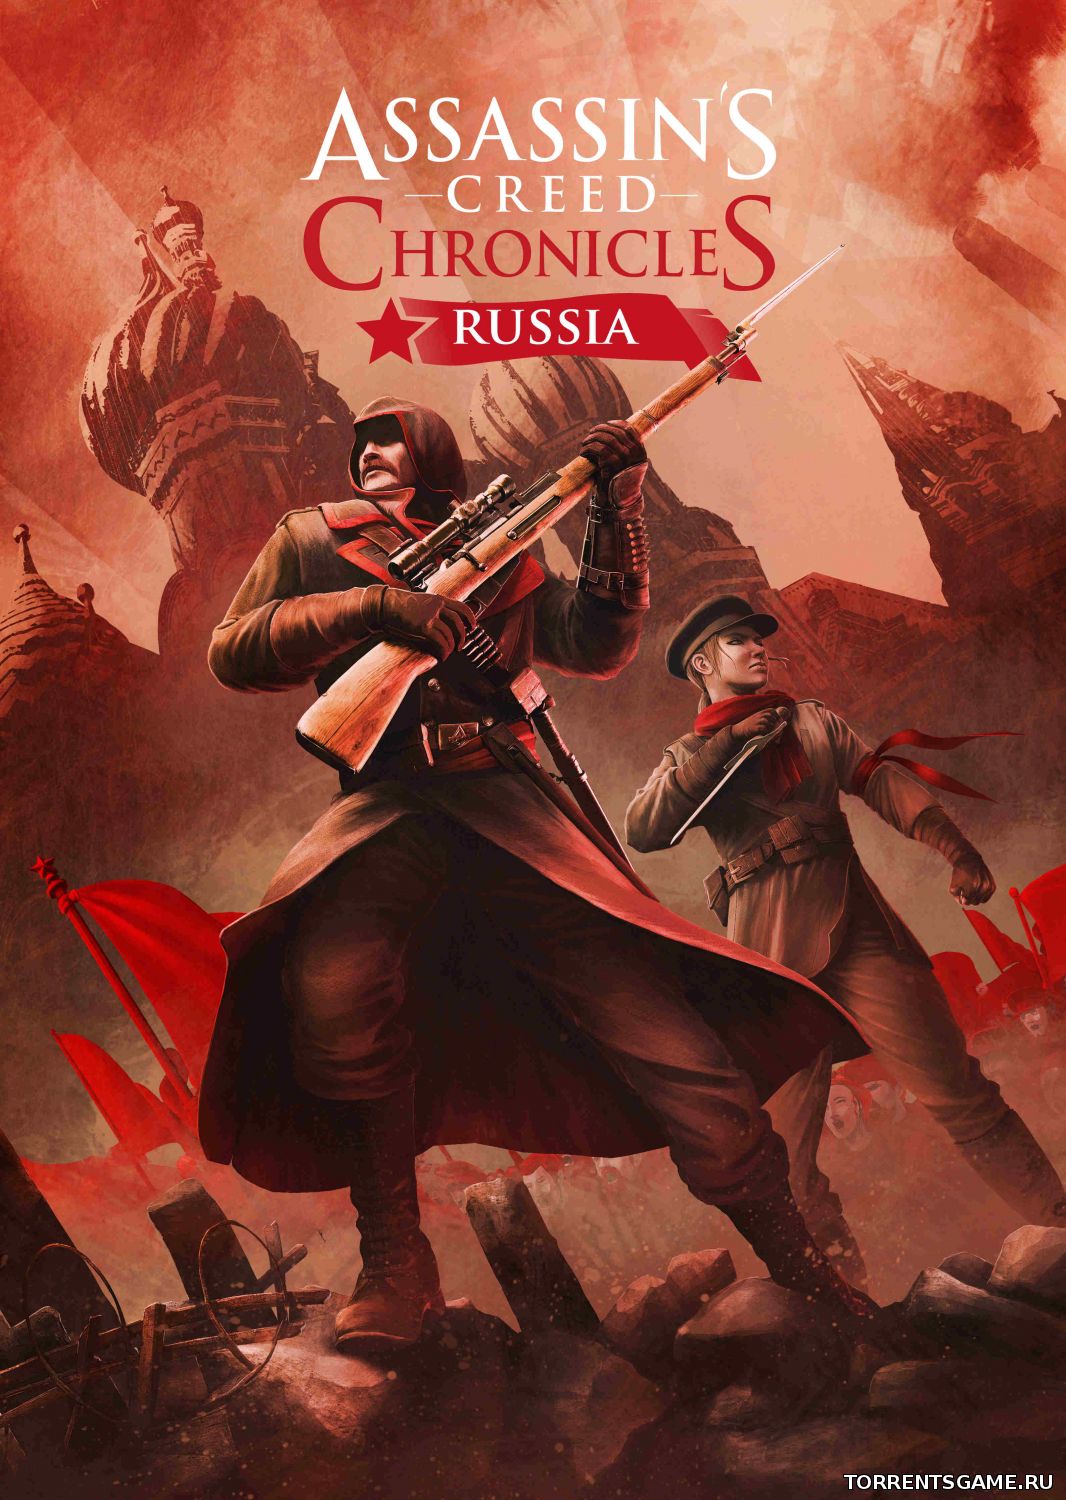 http://torrentsgame.ru/load/games/action/assassins_creed_chronicles_russia/2-1-0-78